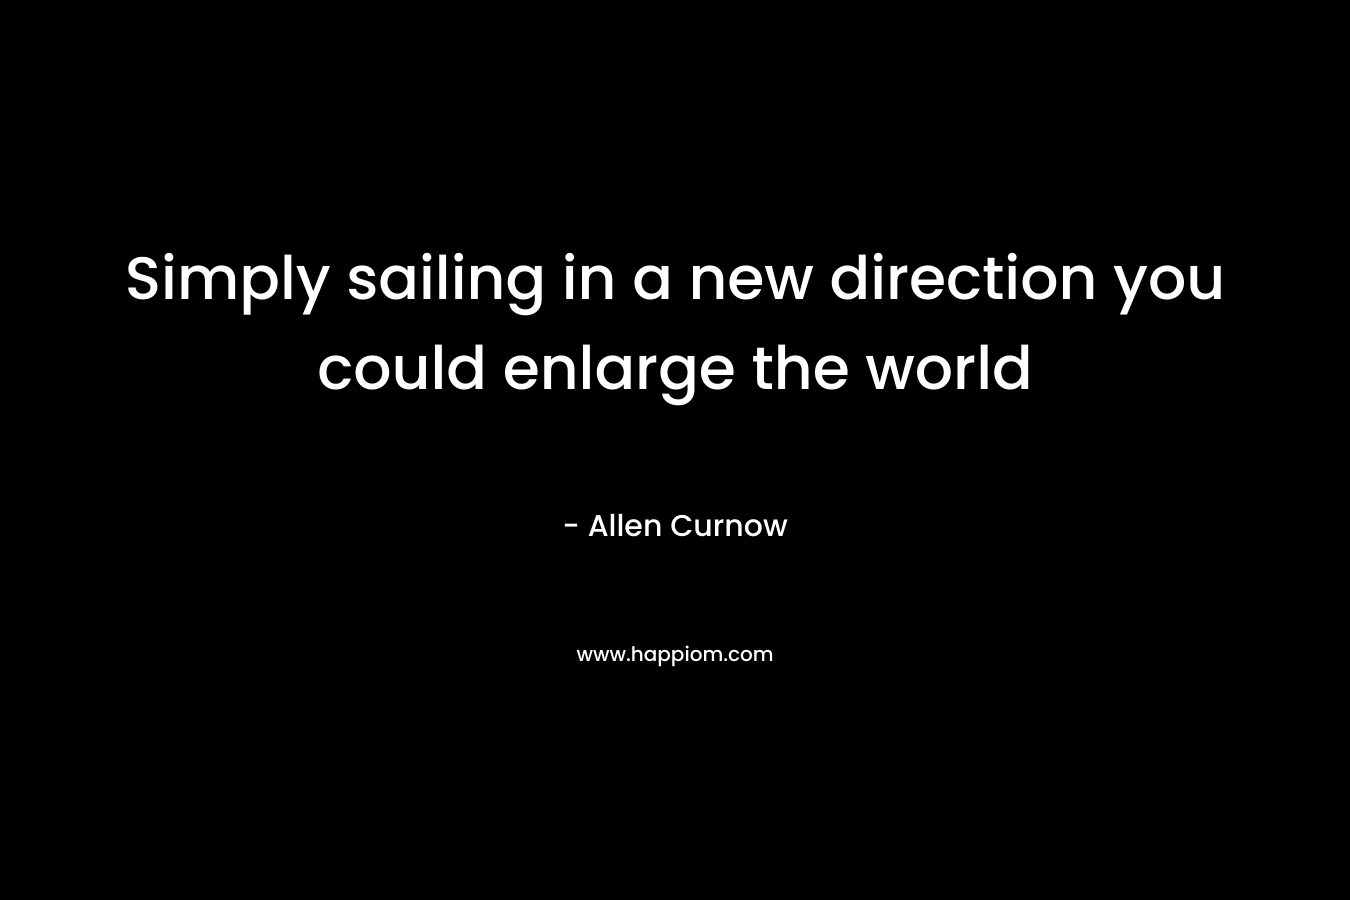 Simply sailing in a new direction you could enlarge the world